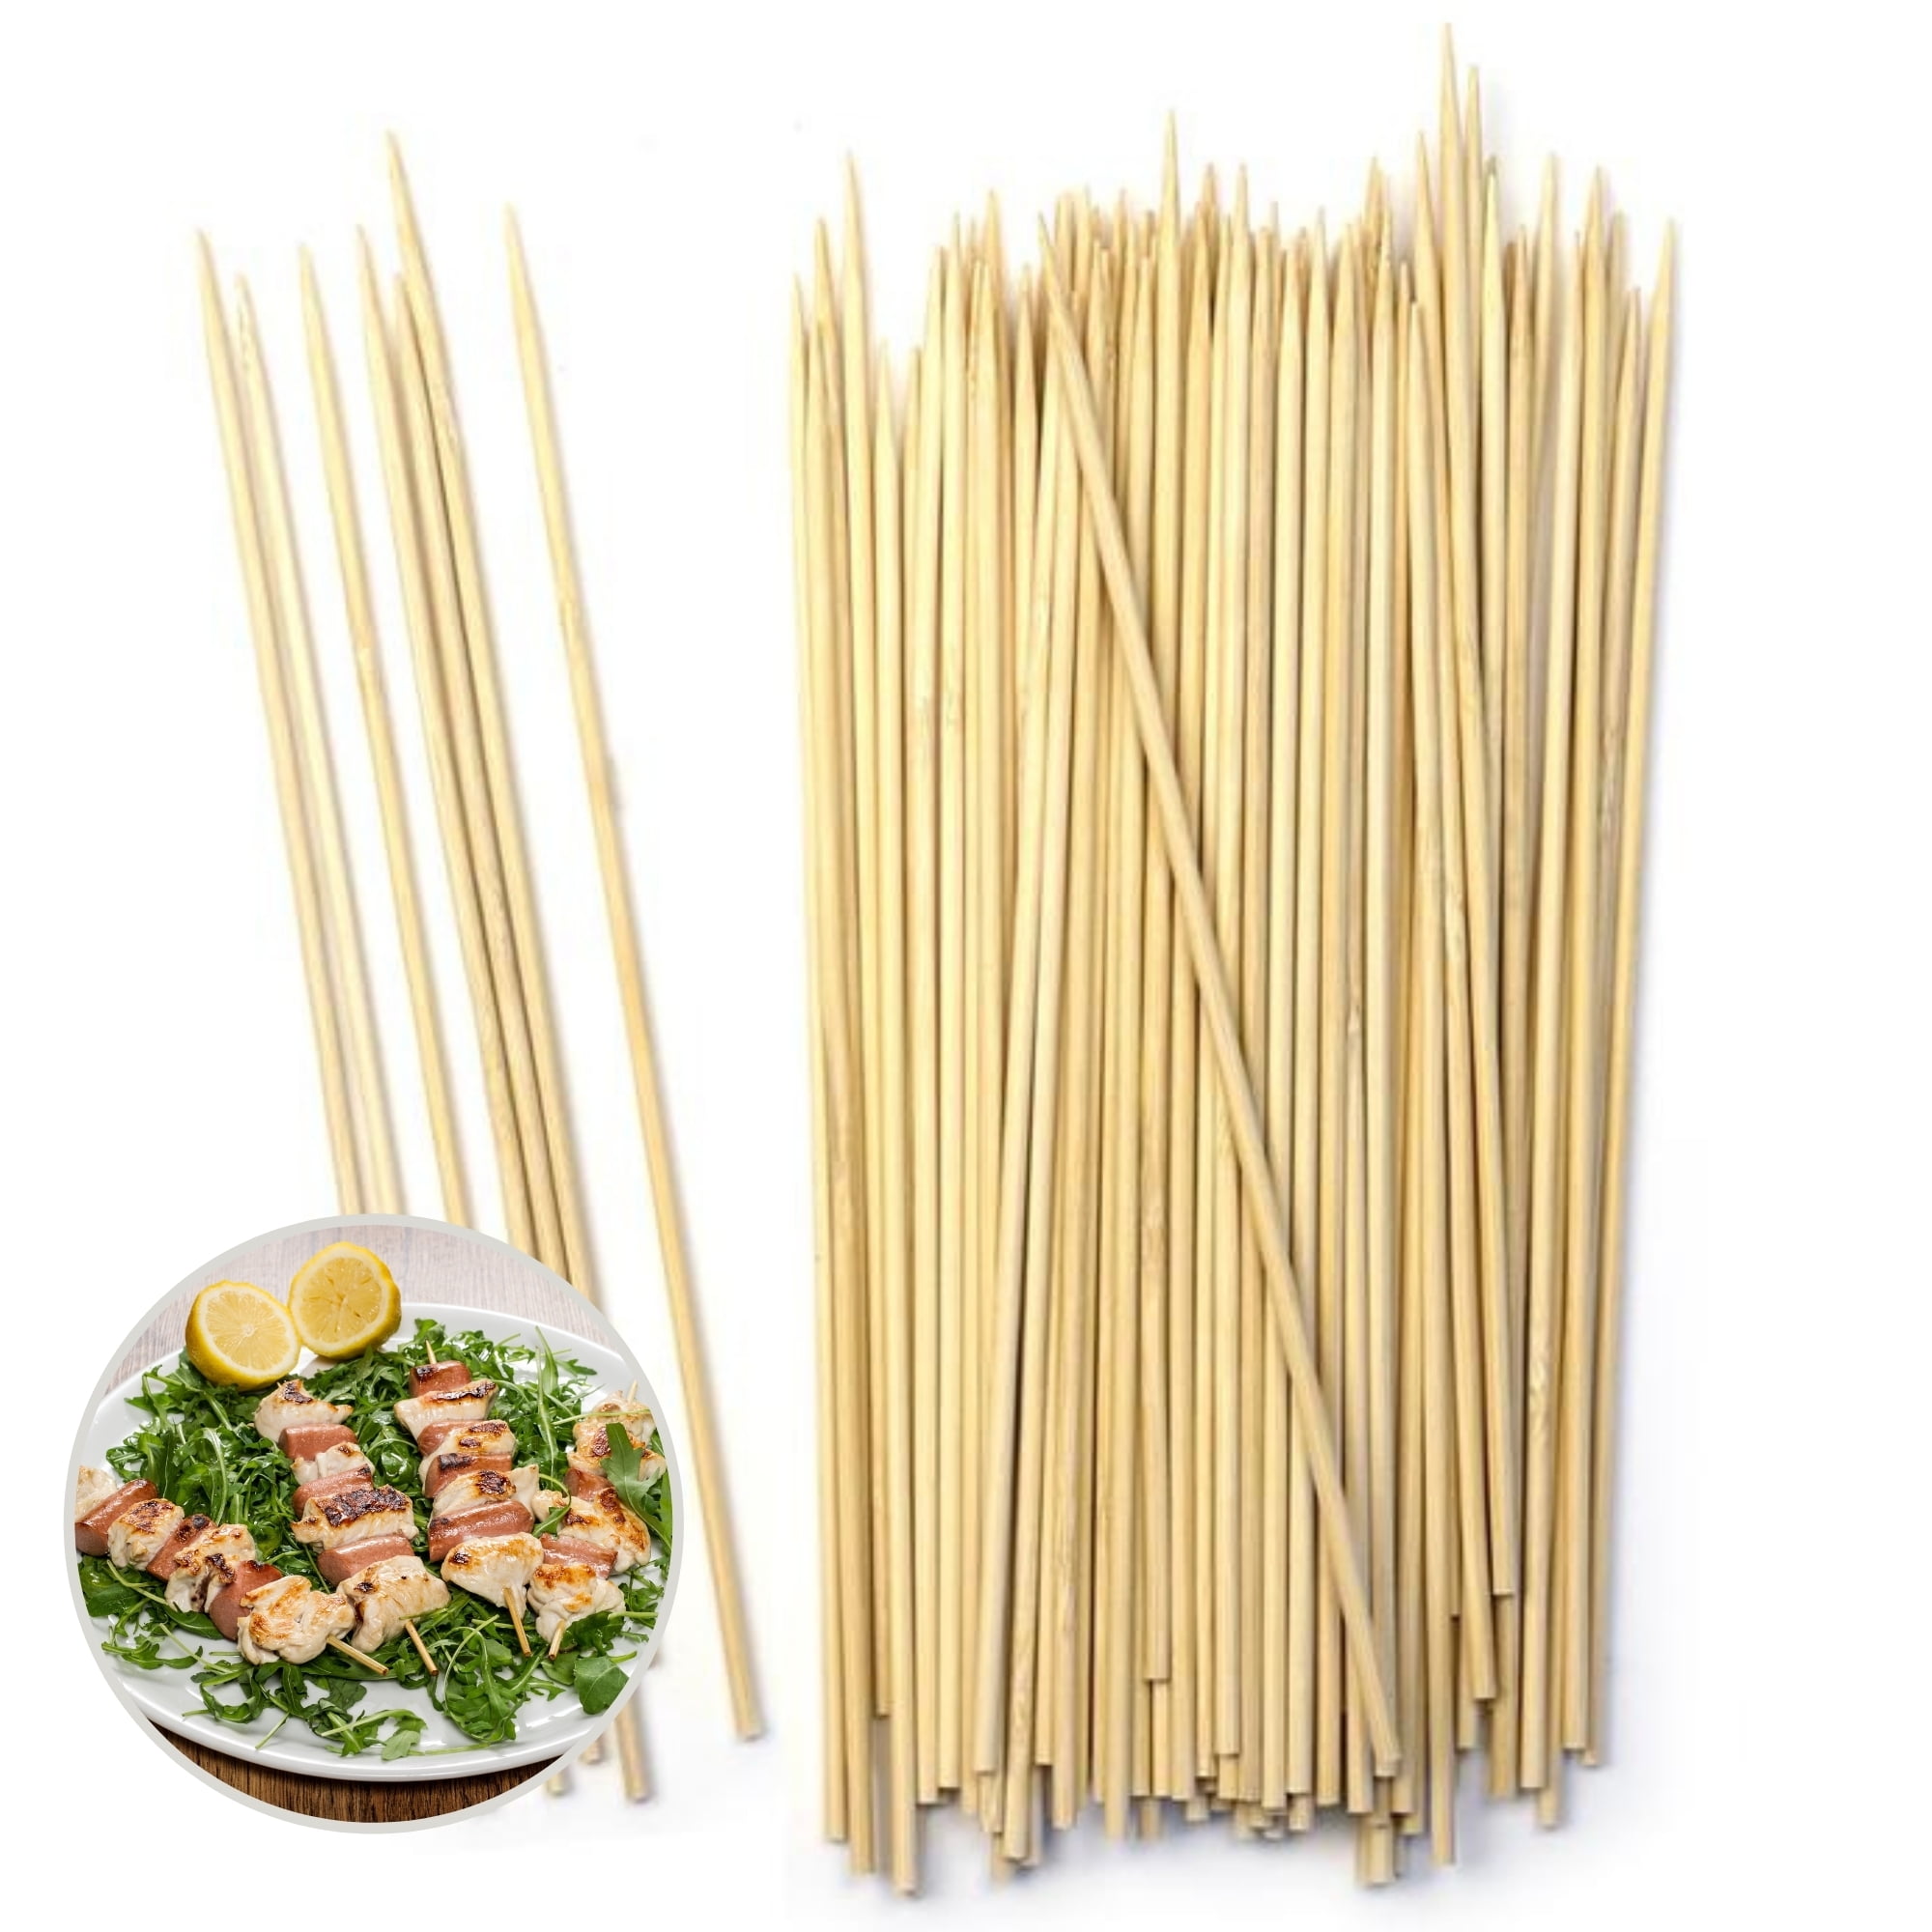 50 pcs Bamboo Skewers 6 Inch BBQ Paddle Sticks Wooden Grill Kebab Barbecue 